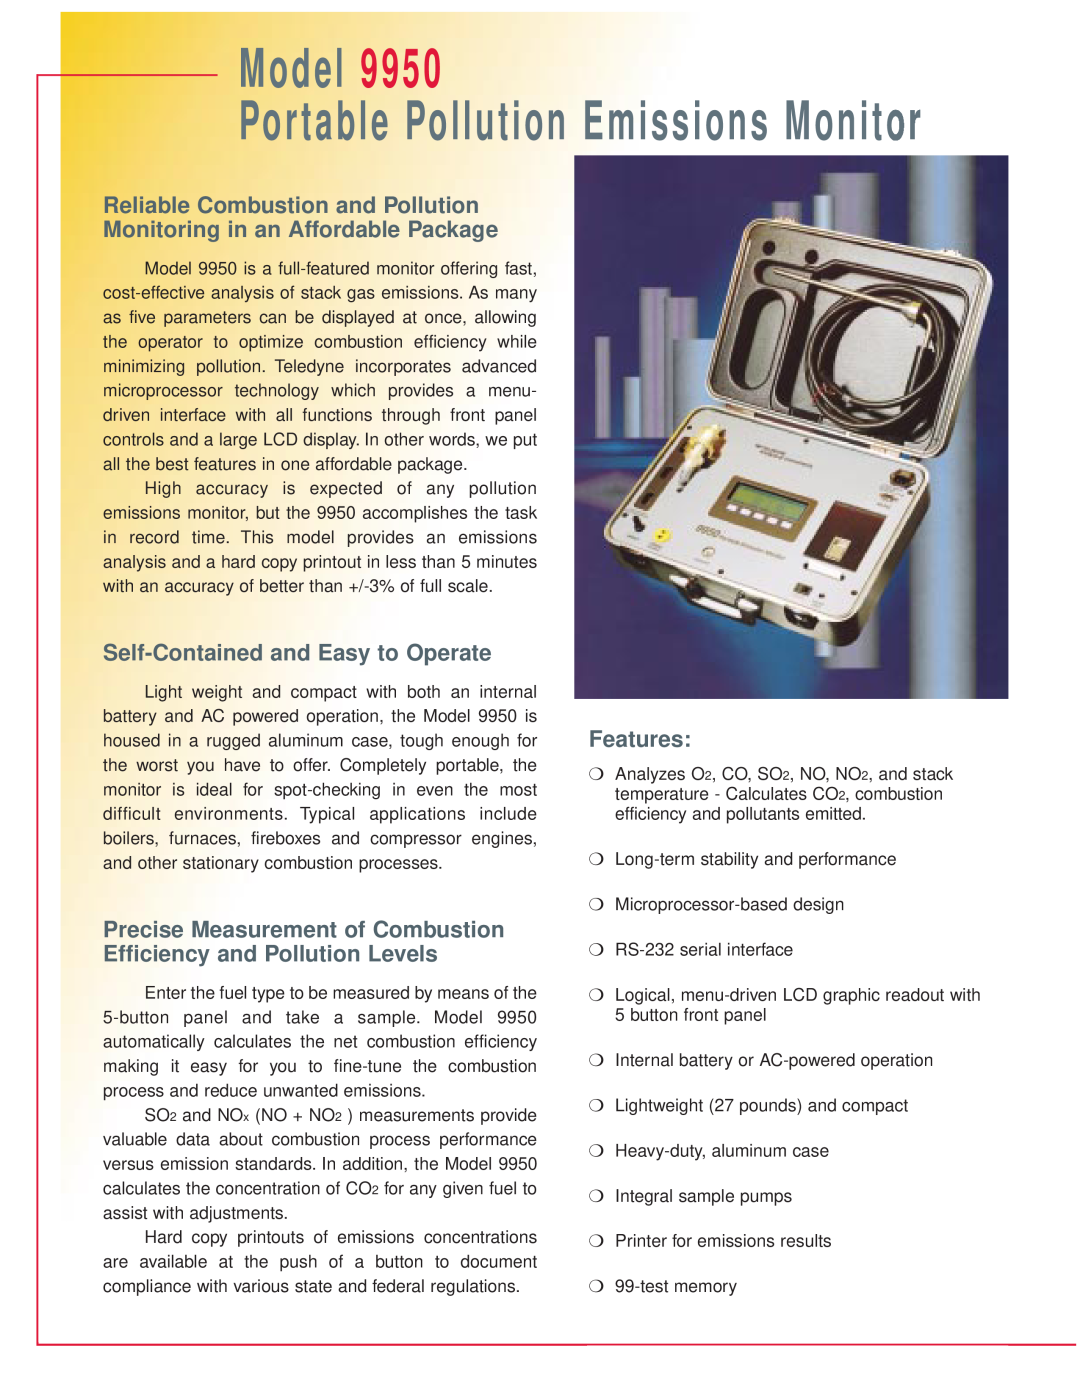 Teledyne 9950 Reliable Combustion and Pollution Monitoring in an Affordable Package, Self-Contained and Easy to Operate 